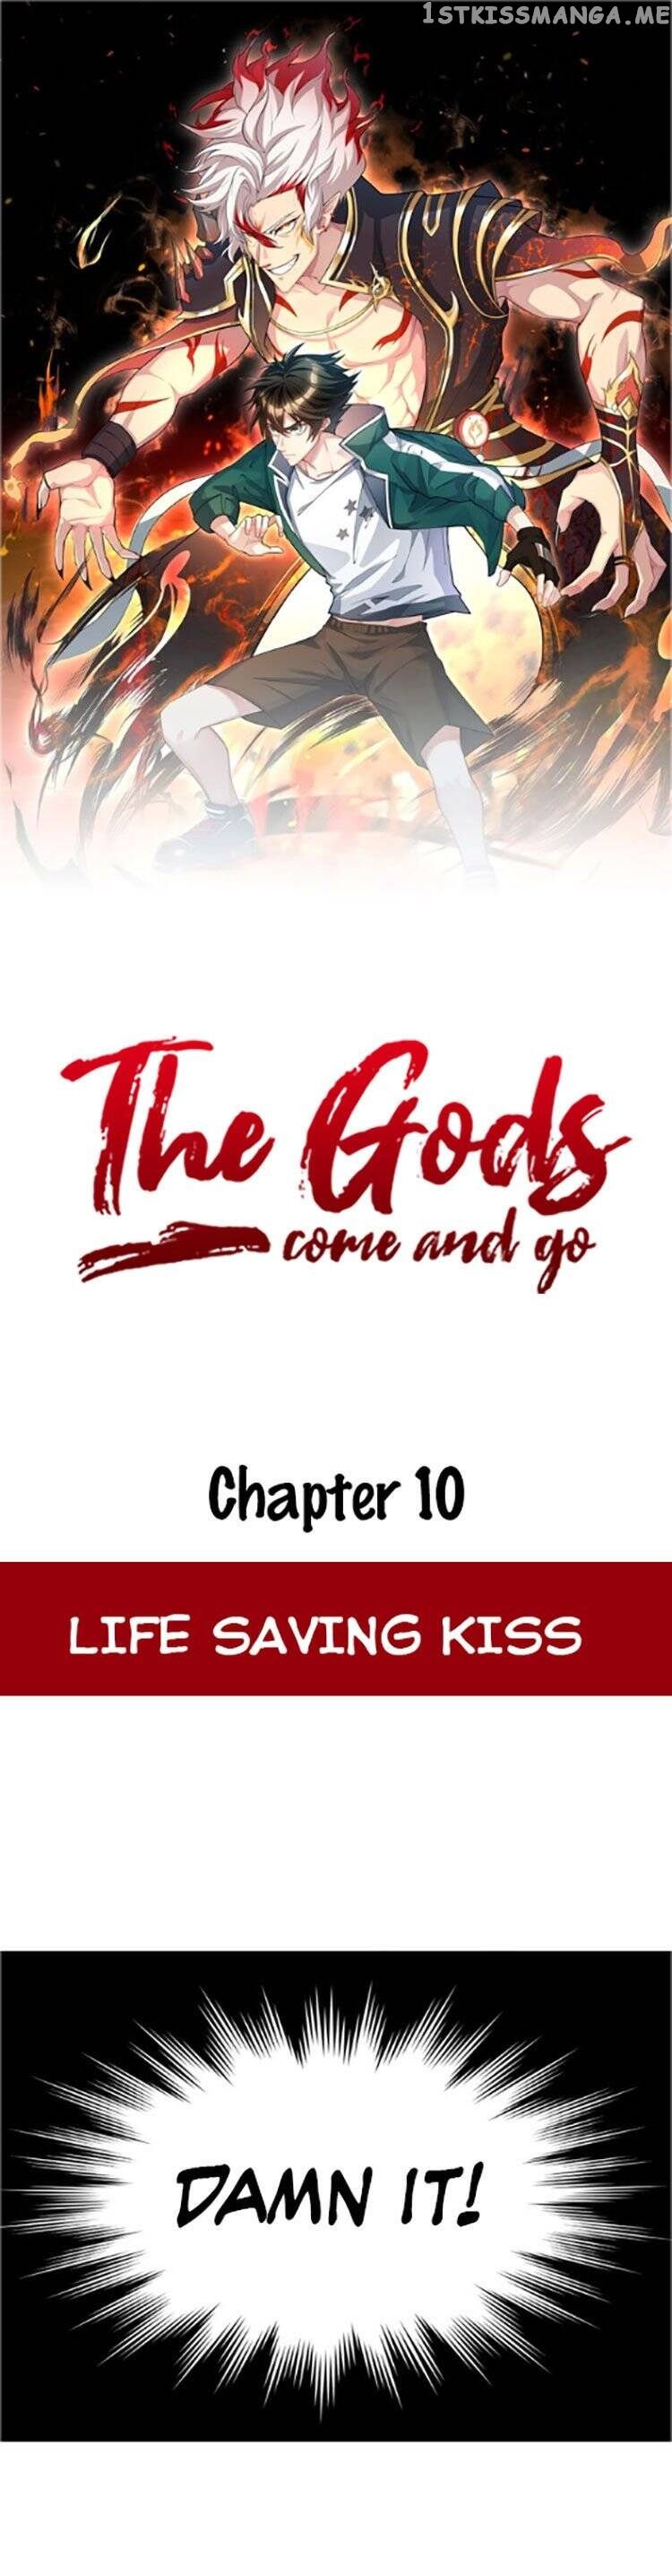 The Gods, Comes and Go chapter 10 - page 2